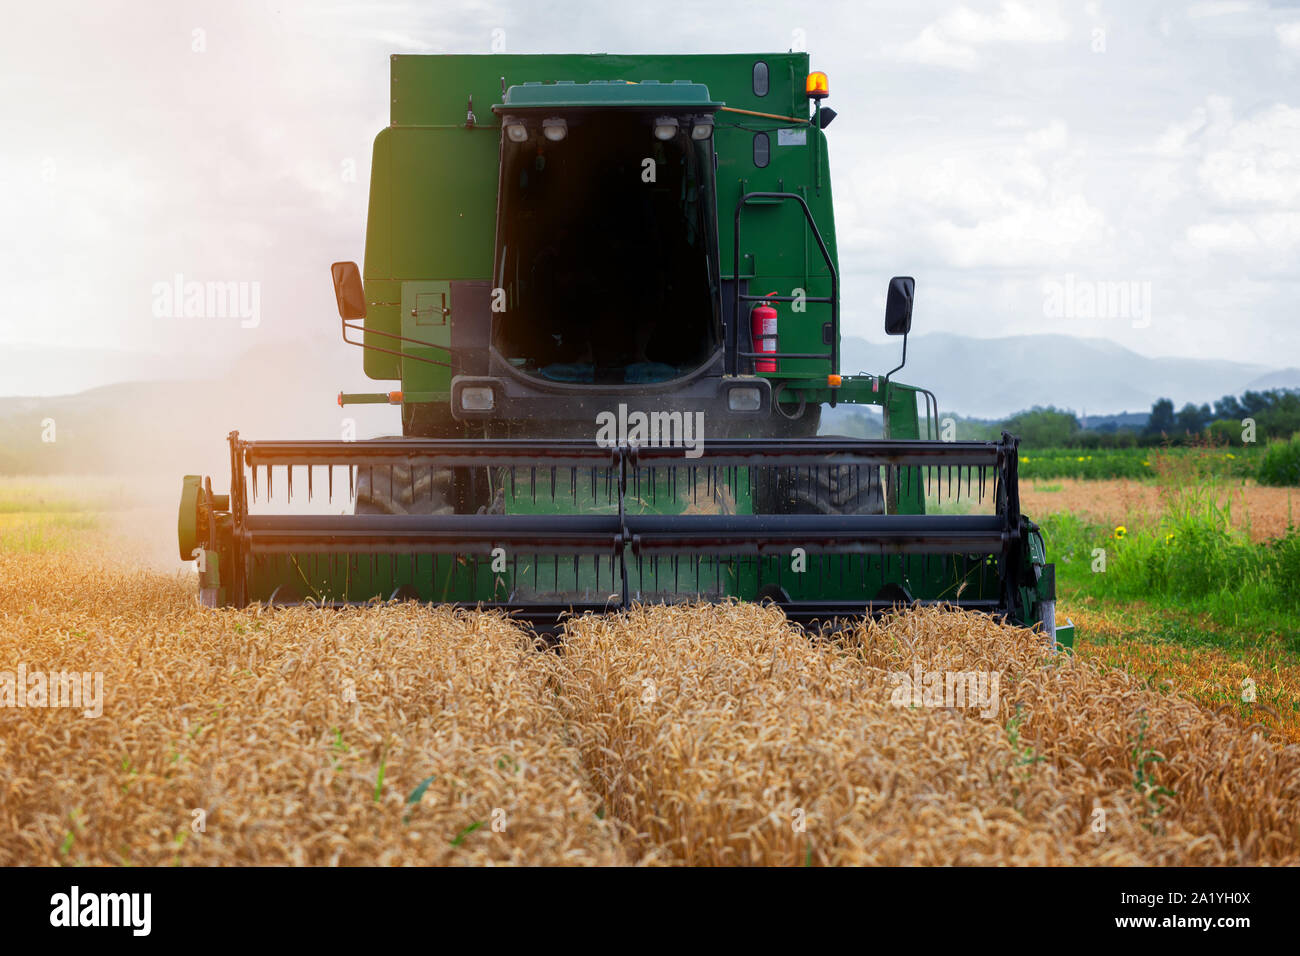 Combine harvester in action on wheat field. Harvesting is the process of gathering a ripe crop from the fields. Stock Photo